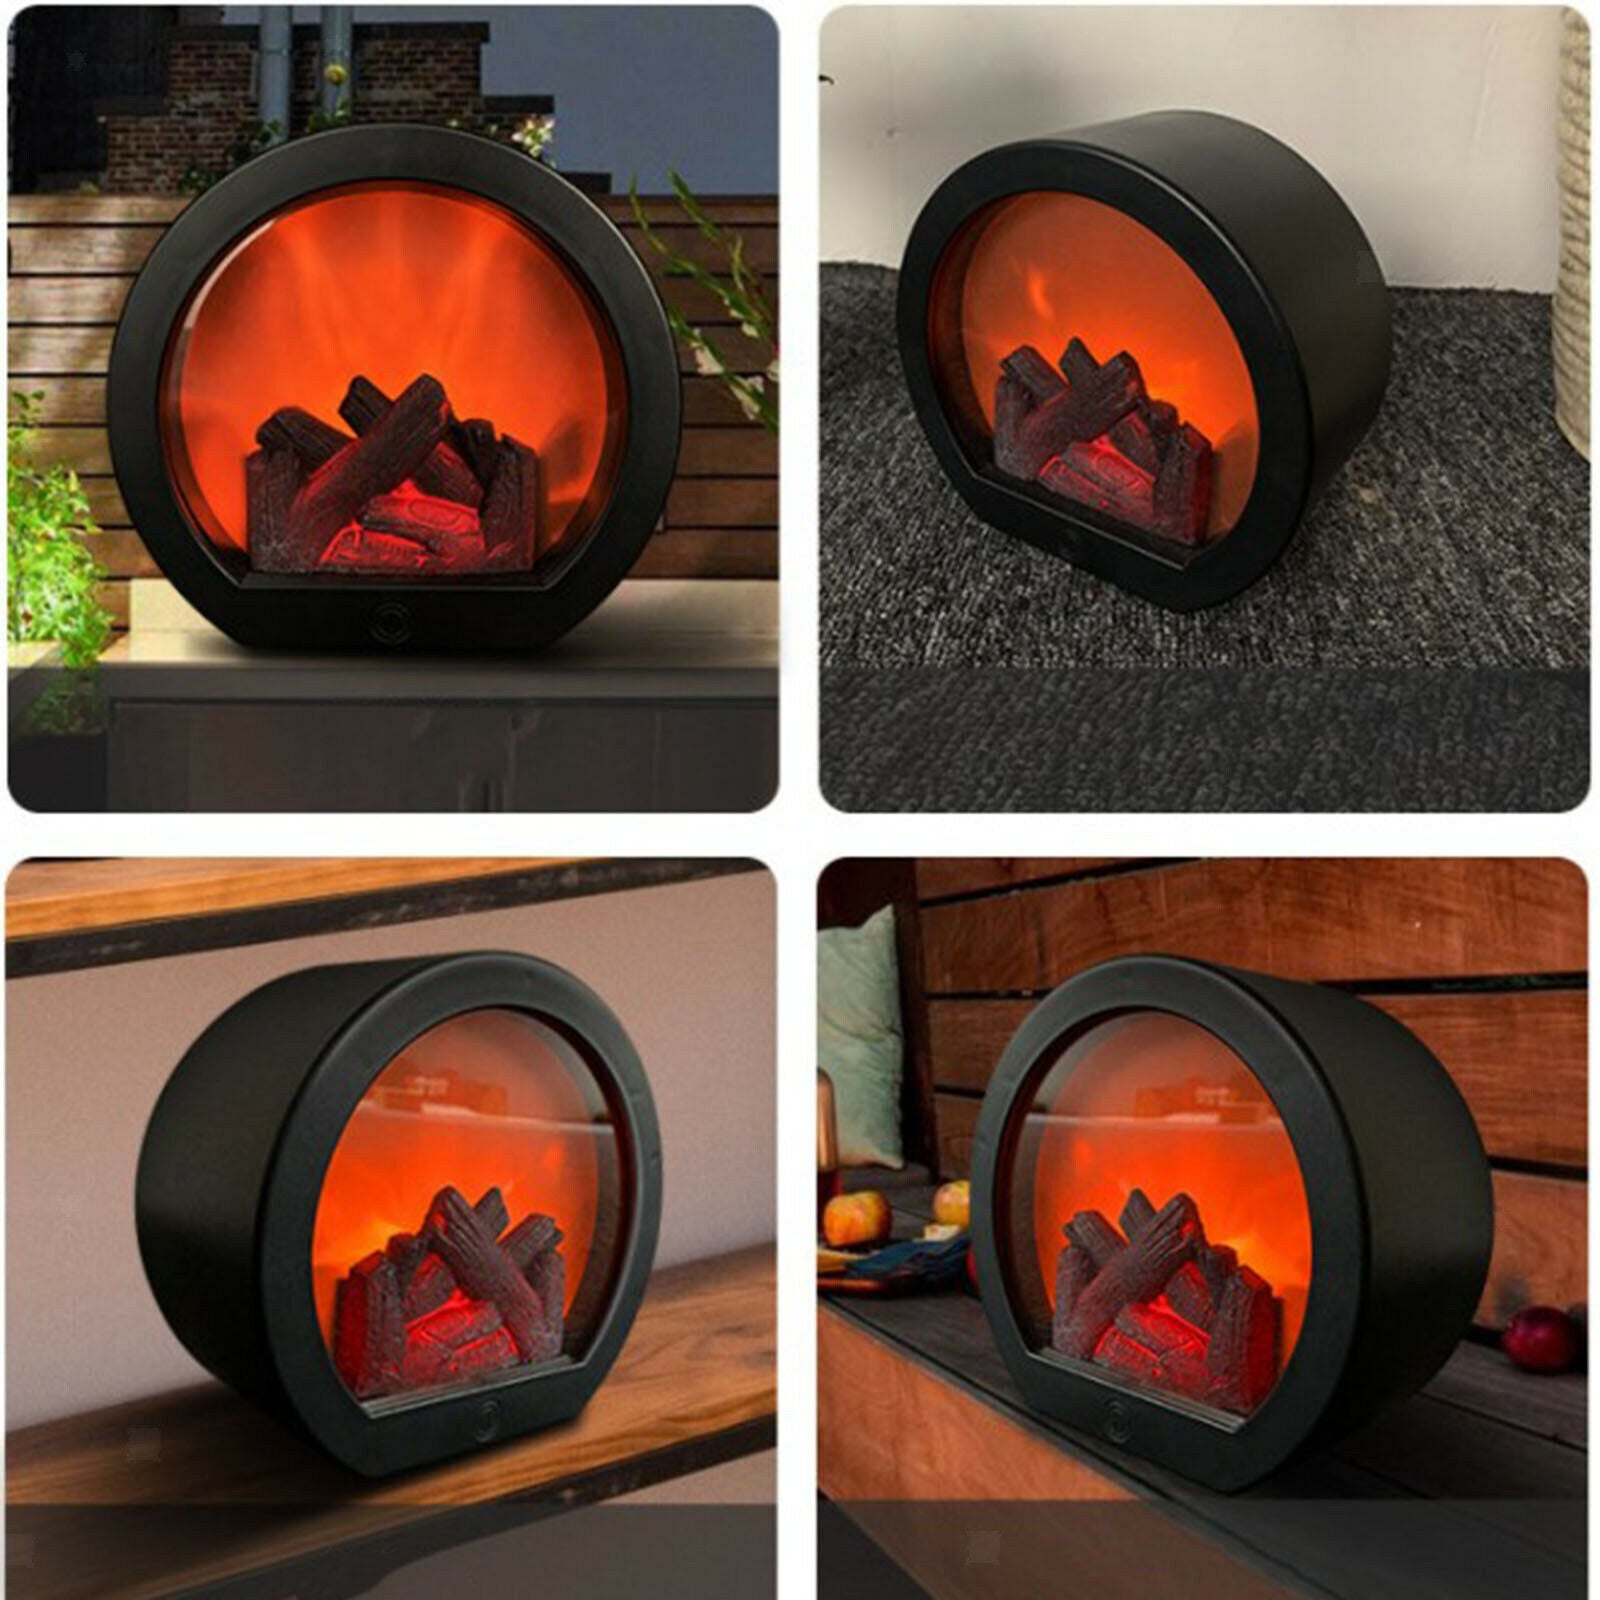 Flickering Flame Effect Lantern LED Light Table Lamp for Home Yard Decor